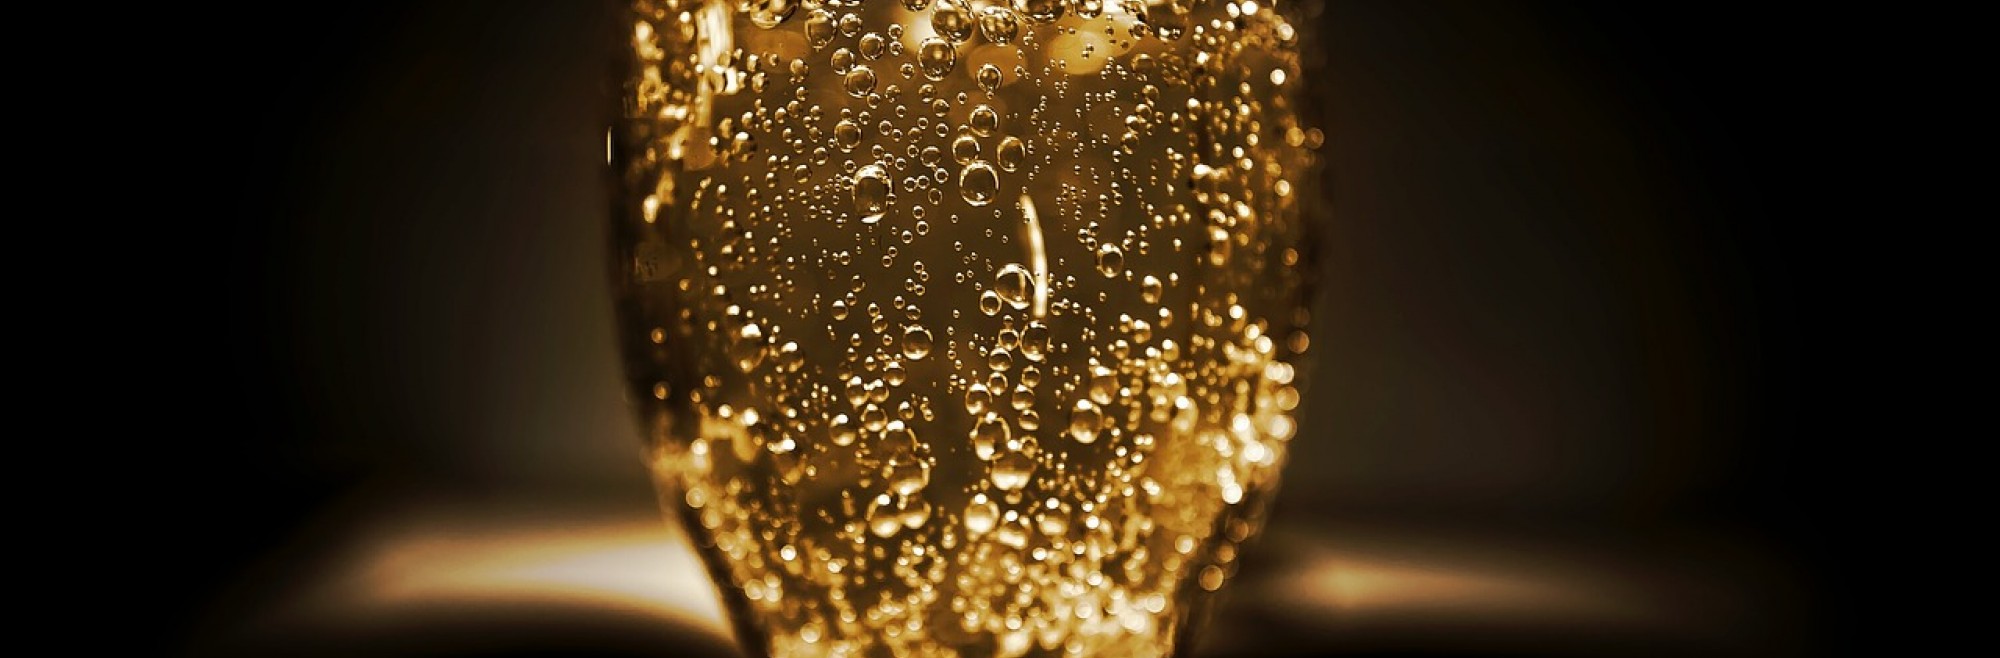 Cremant d'Alsace is 40 years old!